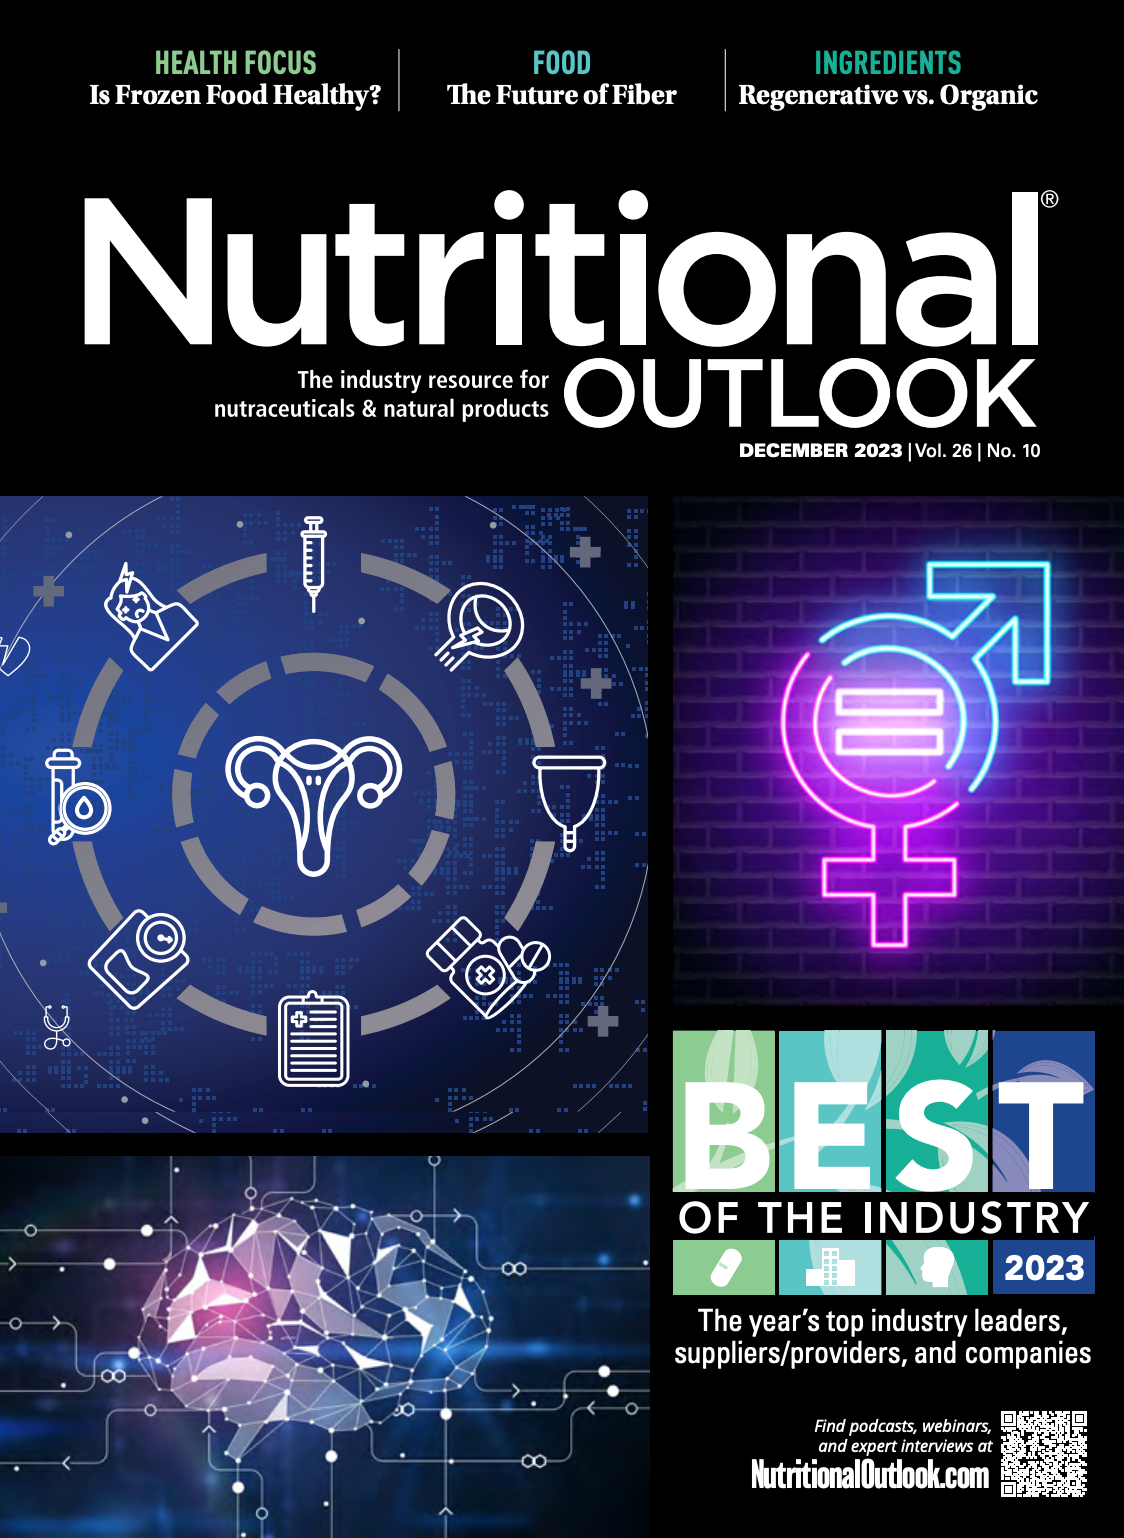 Nutritional Outlook Vol. 26 No. 10